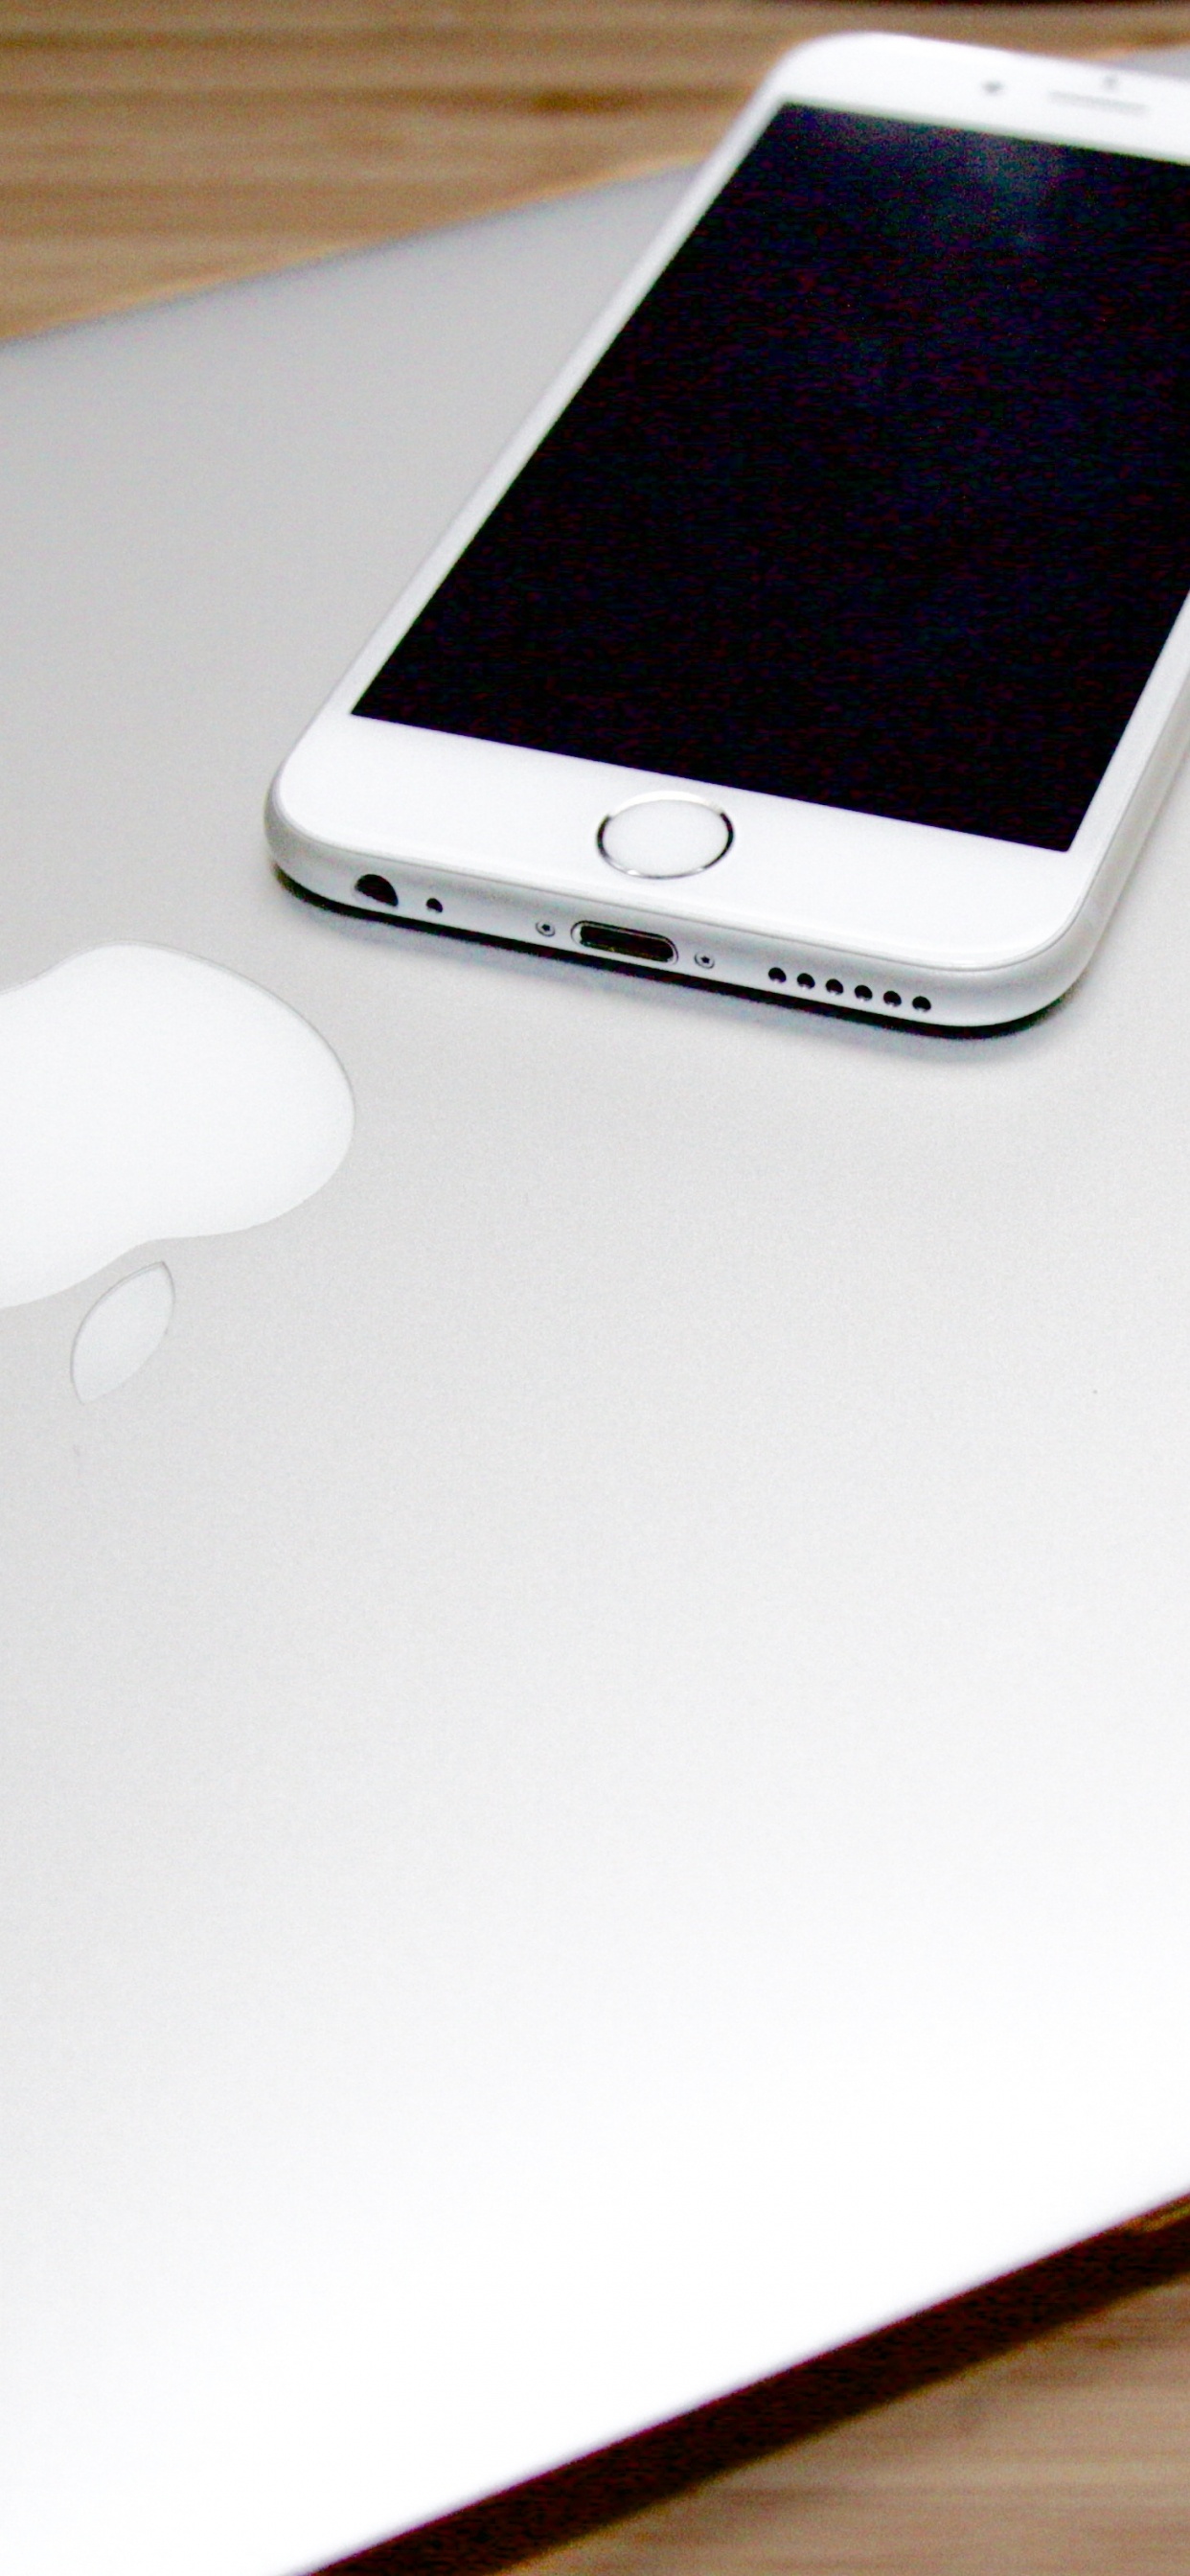 Silver Iphone 6 on Macbook. Wallpaper in 1242x2688 Resolution